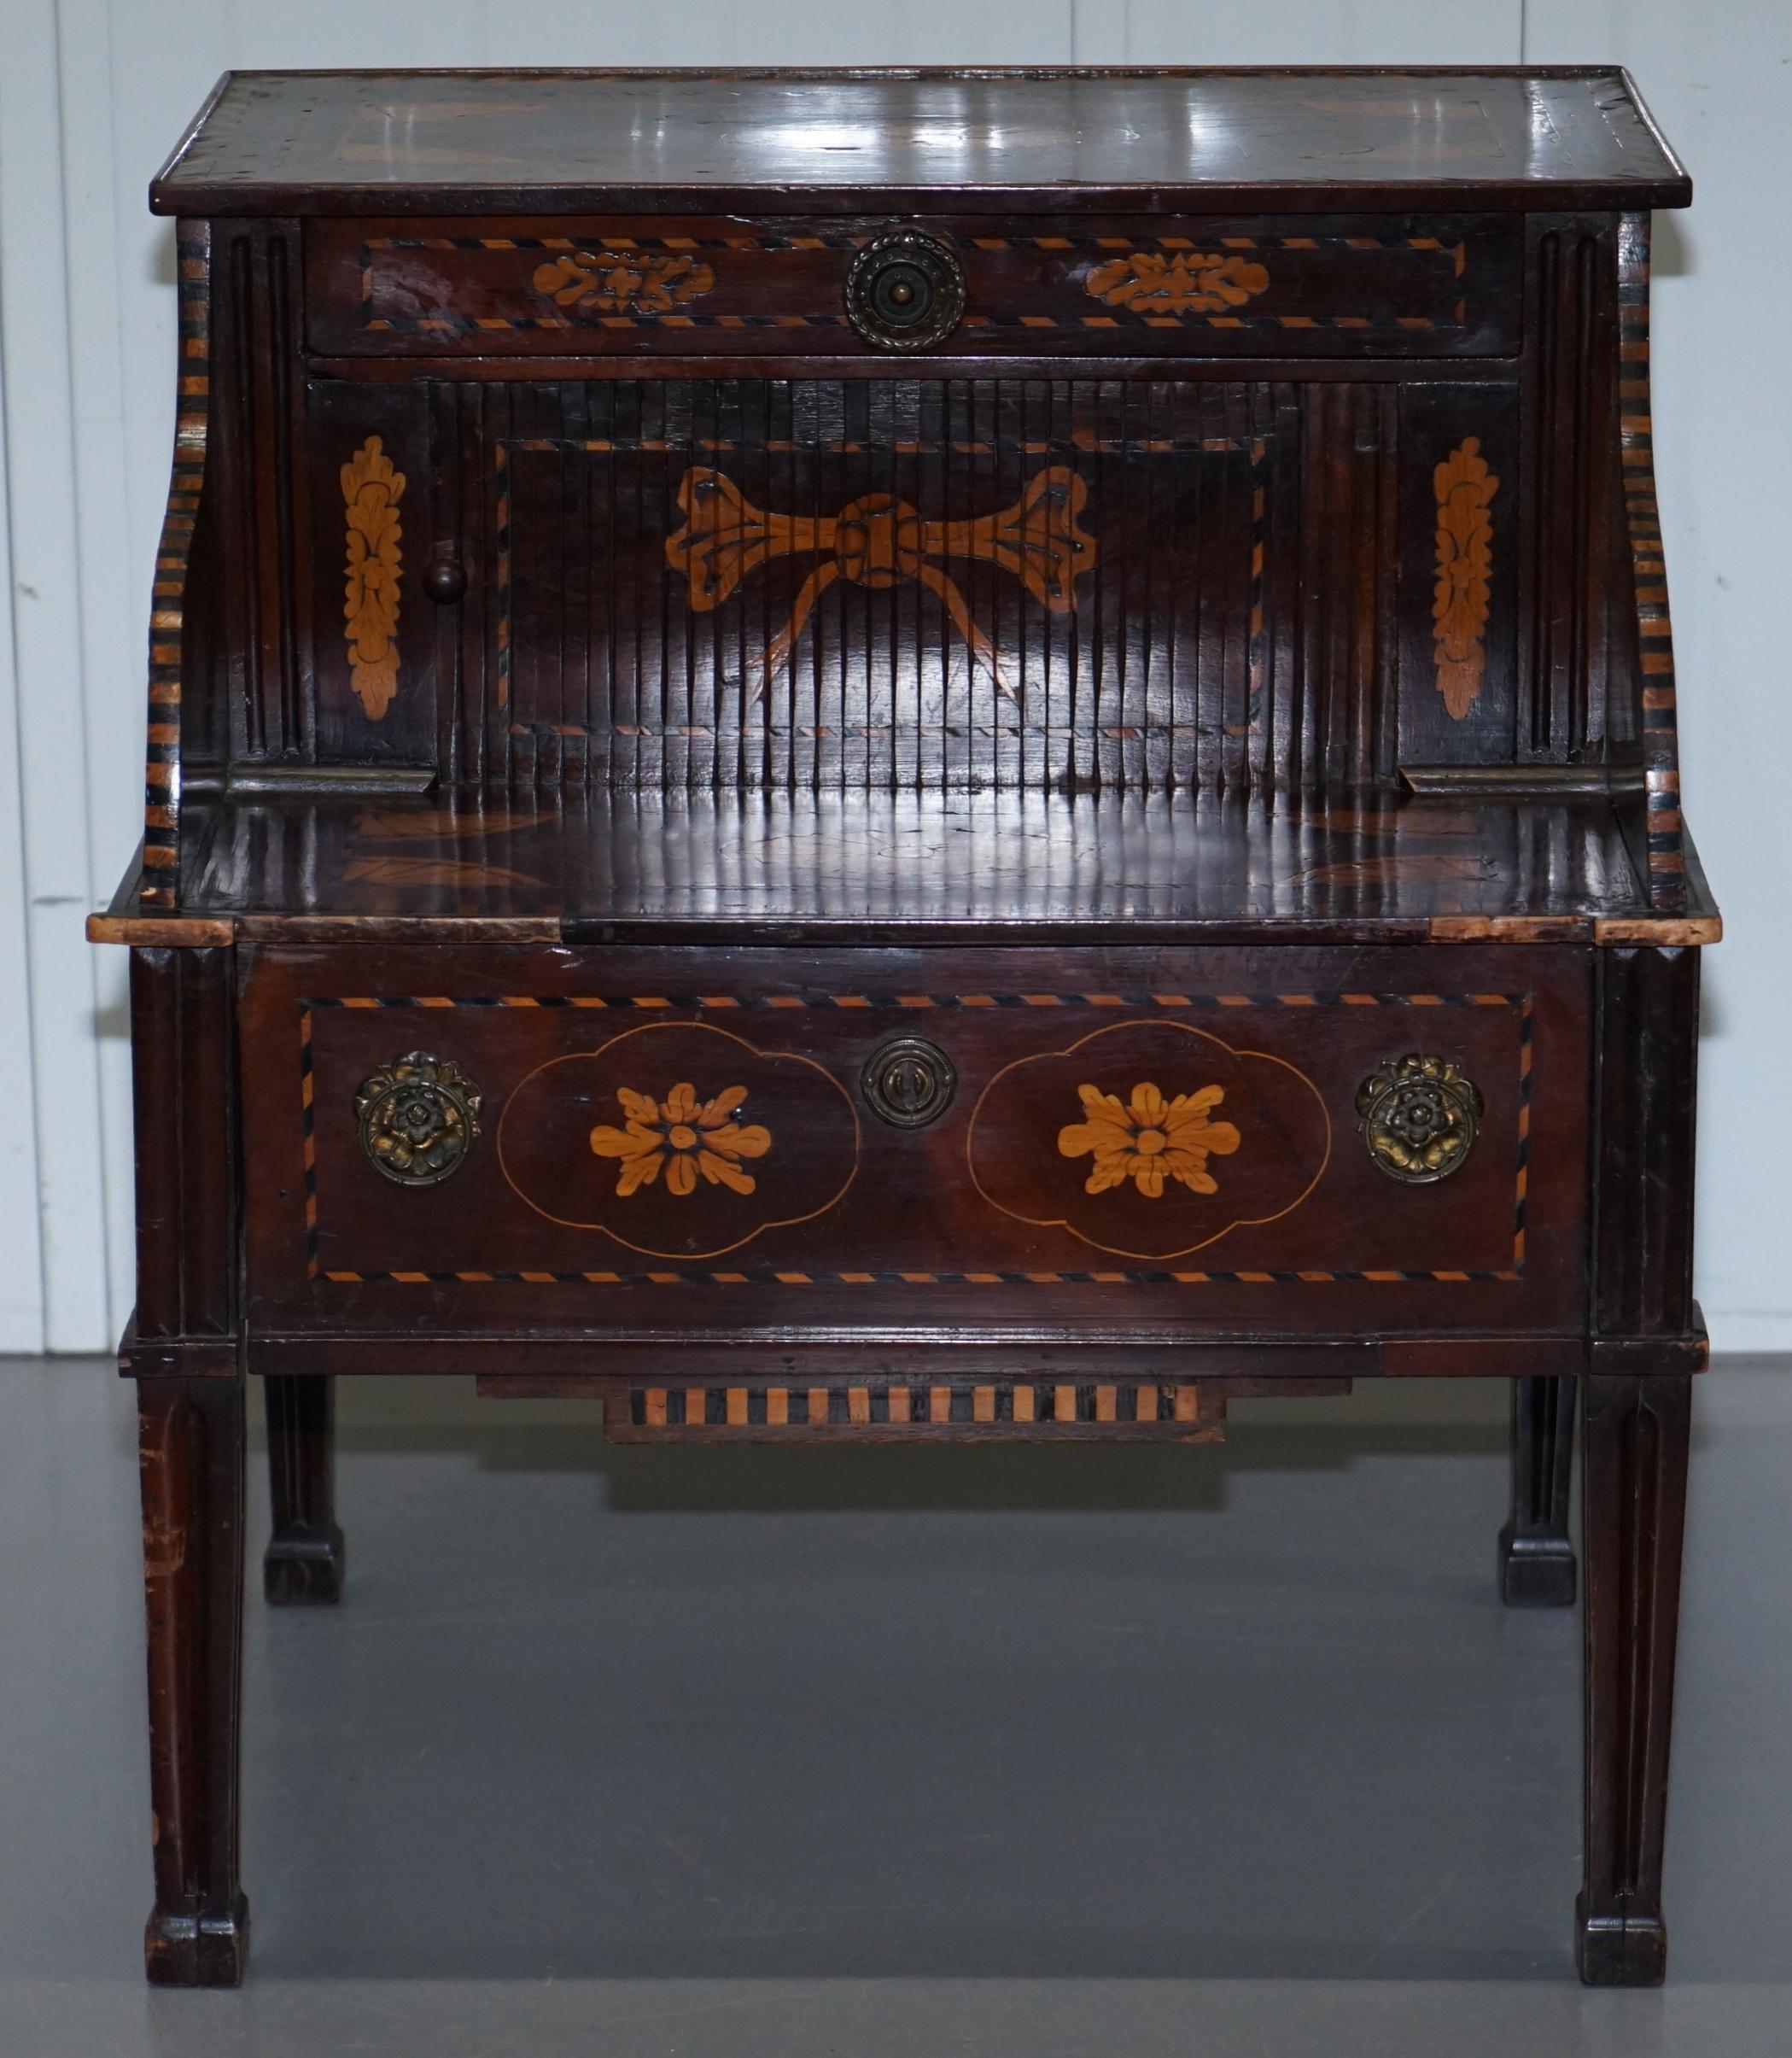 Georgian Rare 18th Century Dutch Marquetry Inlaid Side Table with Tambour Fronted Door